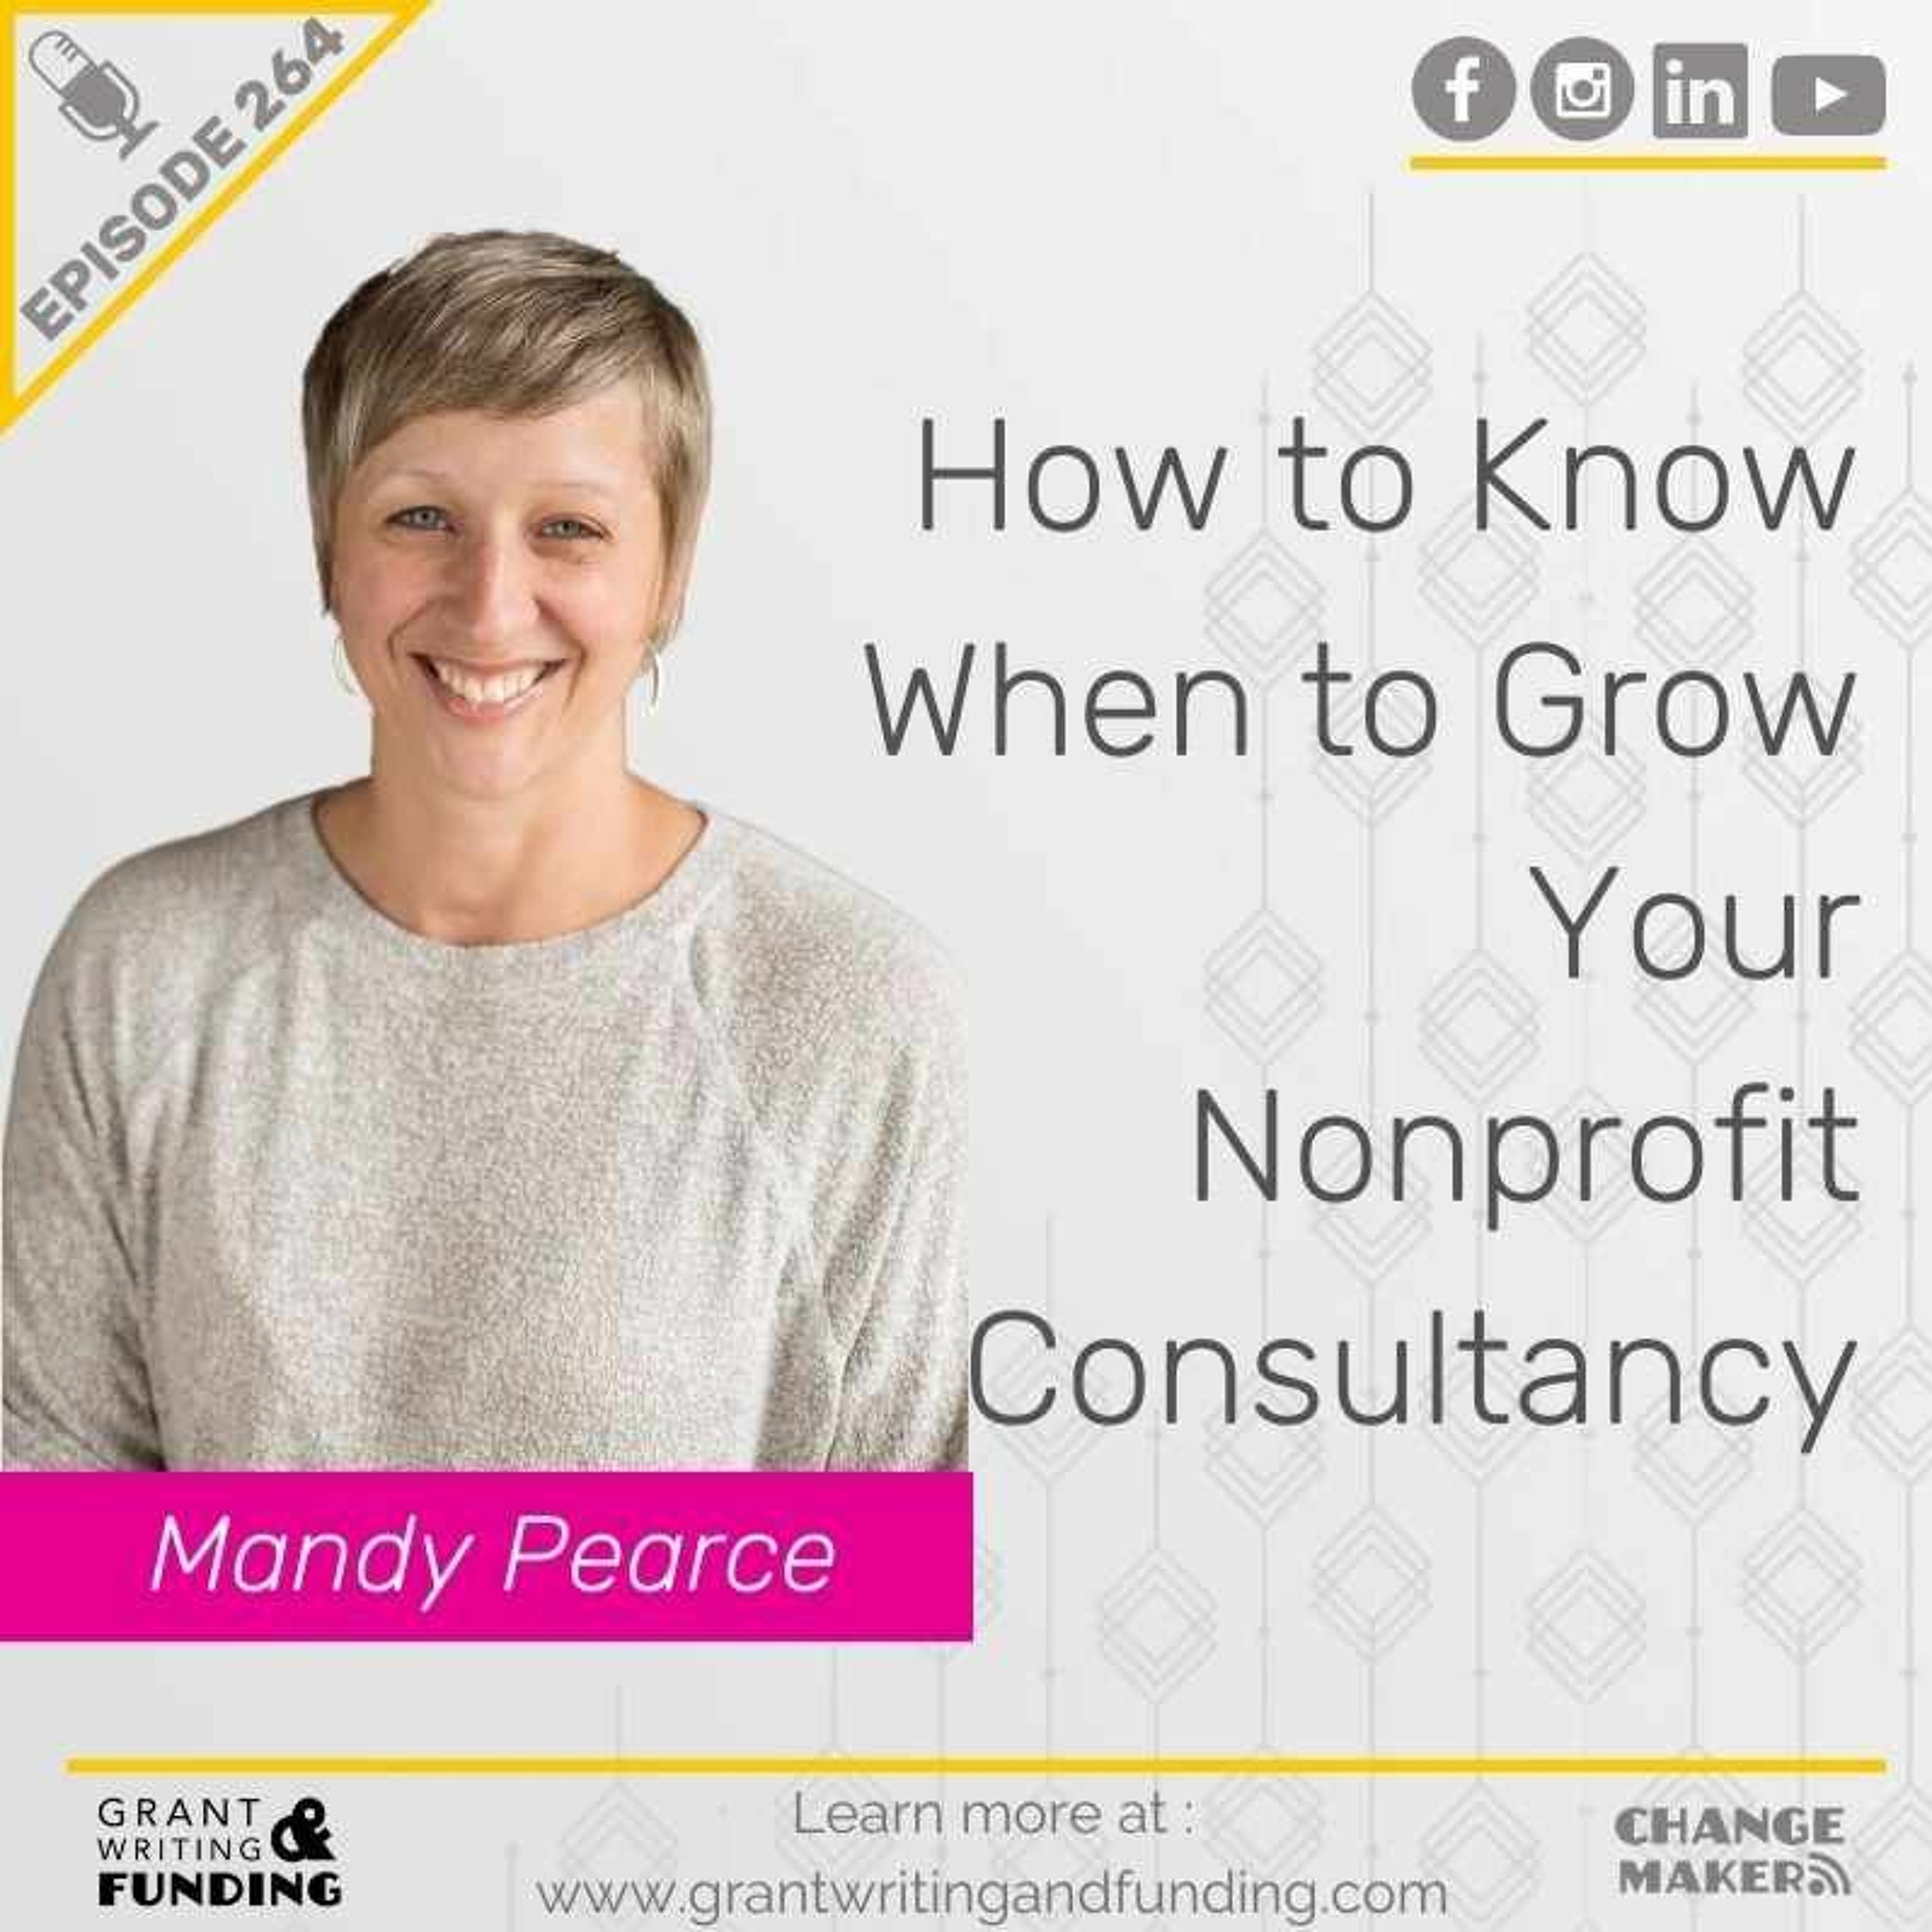 Ep. 264: How to Know When to Grow Your Nonprofit Consultancy with Mandy Pearce